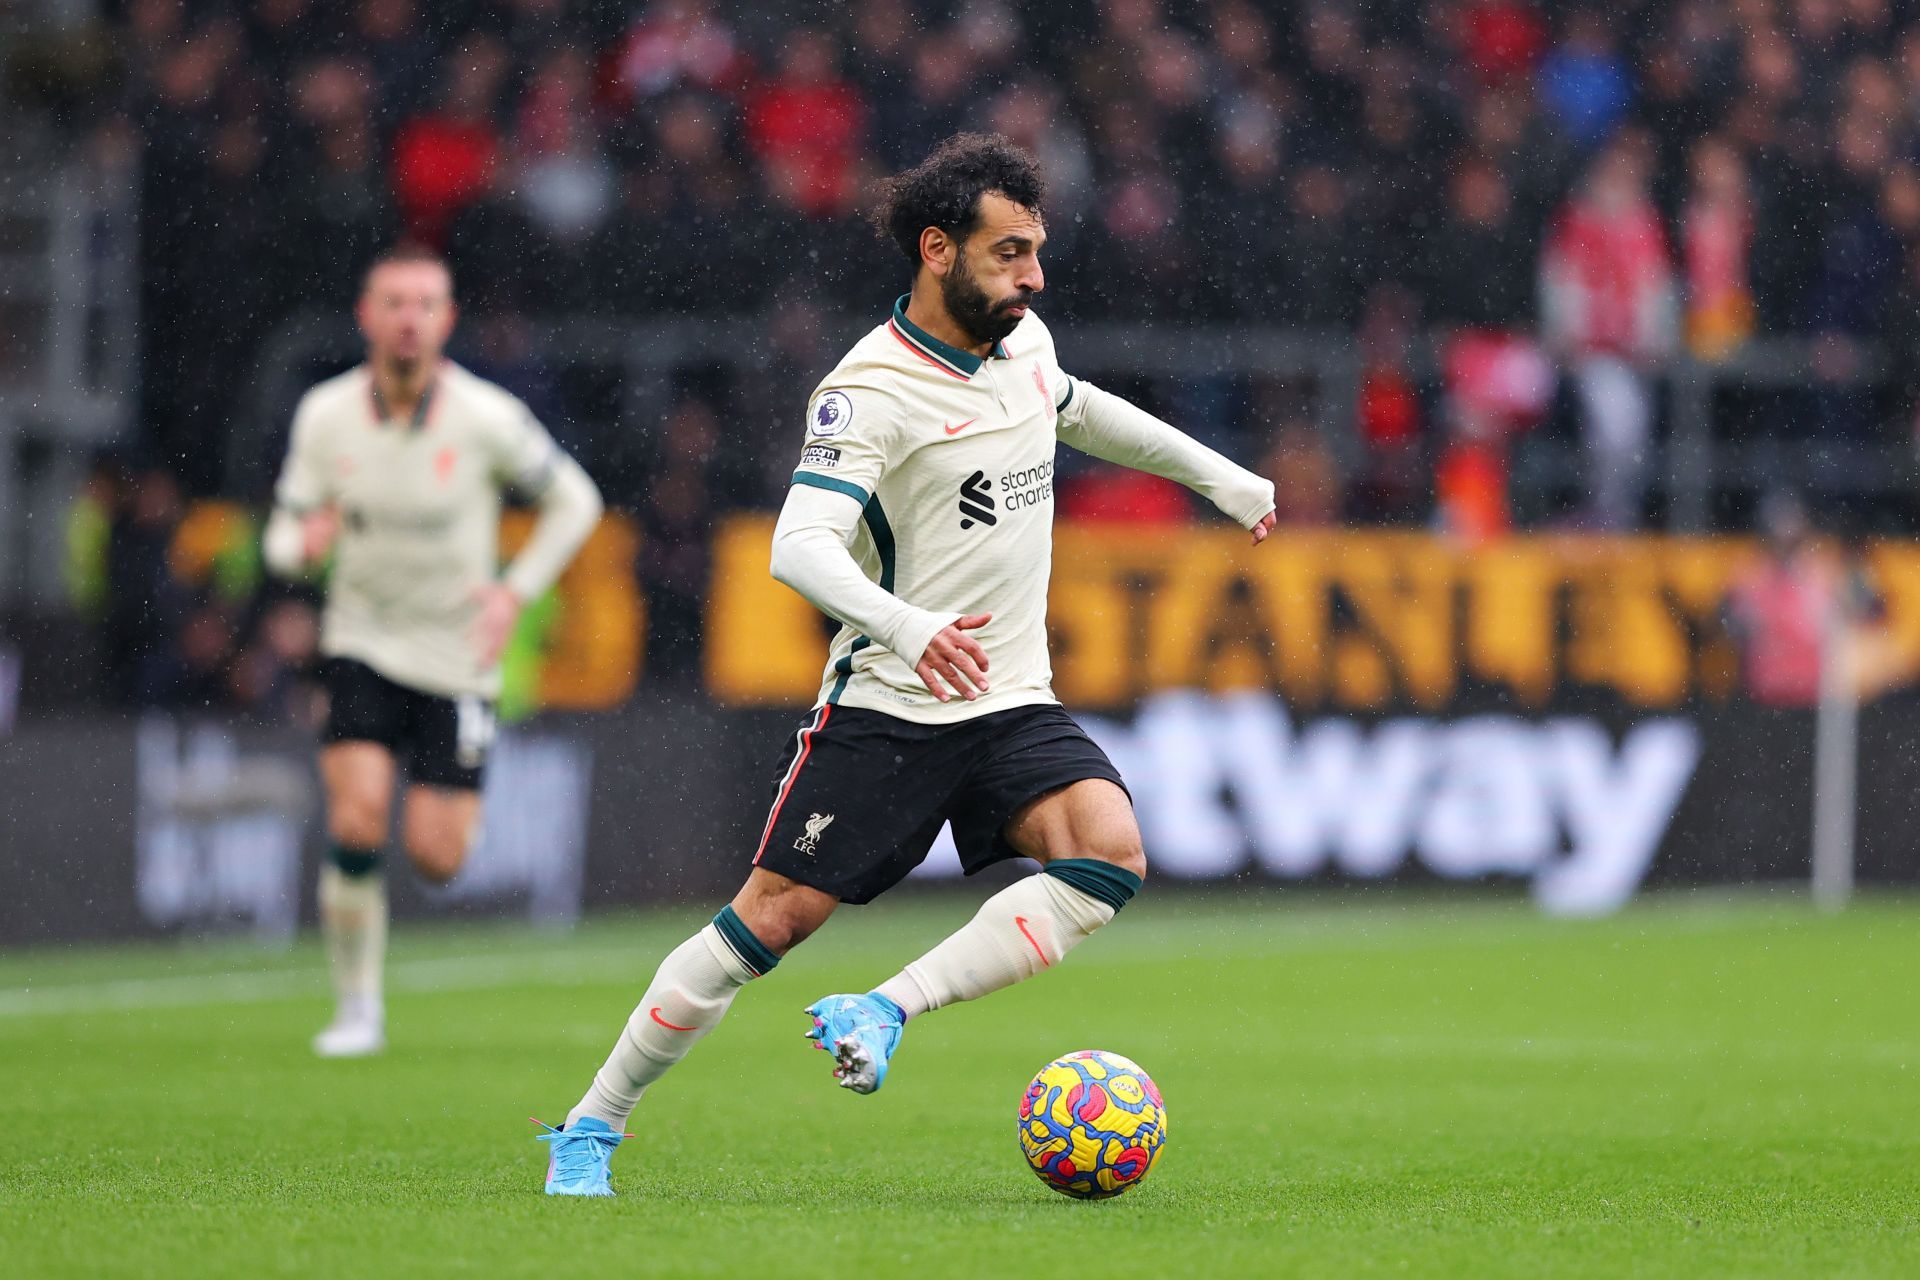 Mo Salah is one of the most important players for Jurgen Klopp